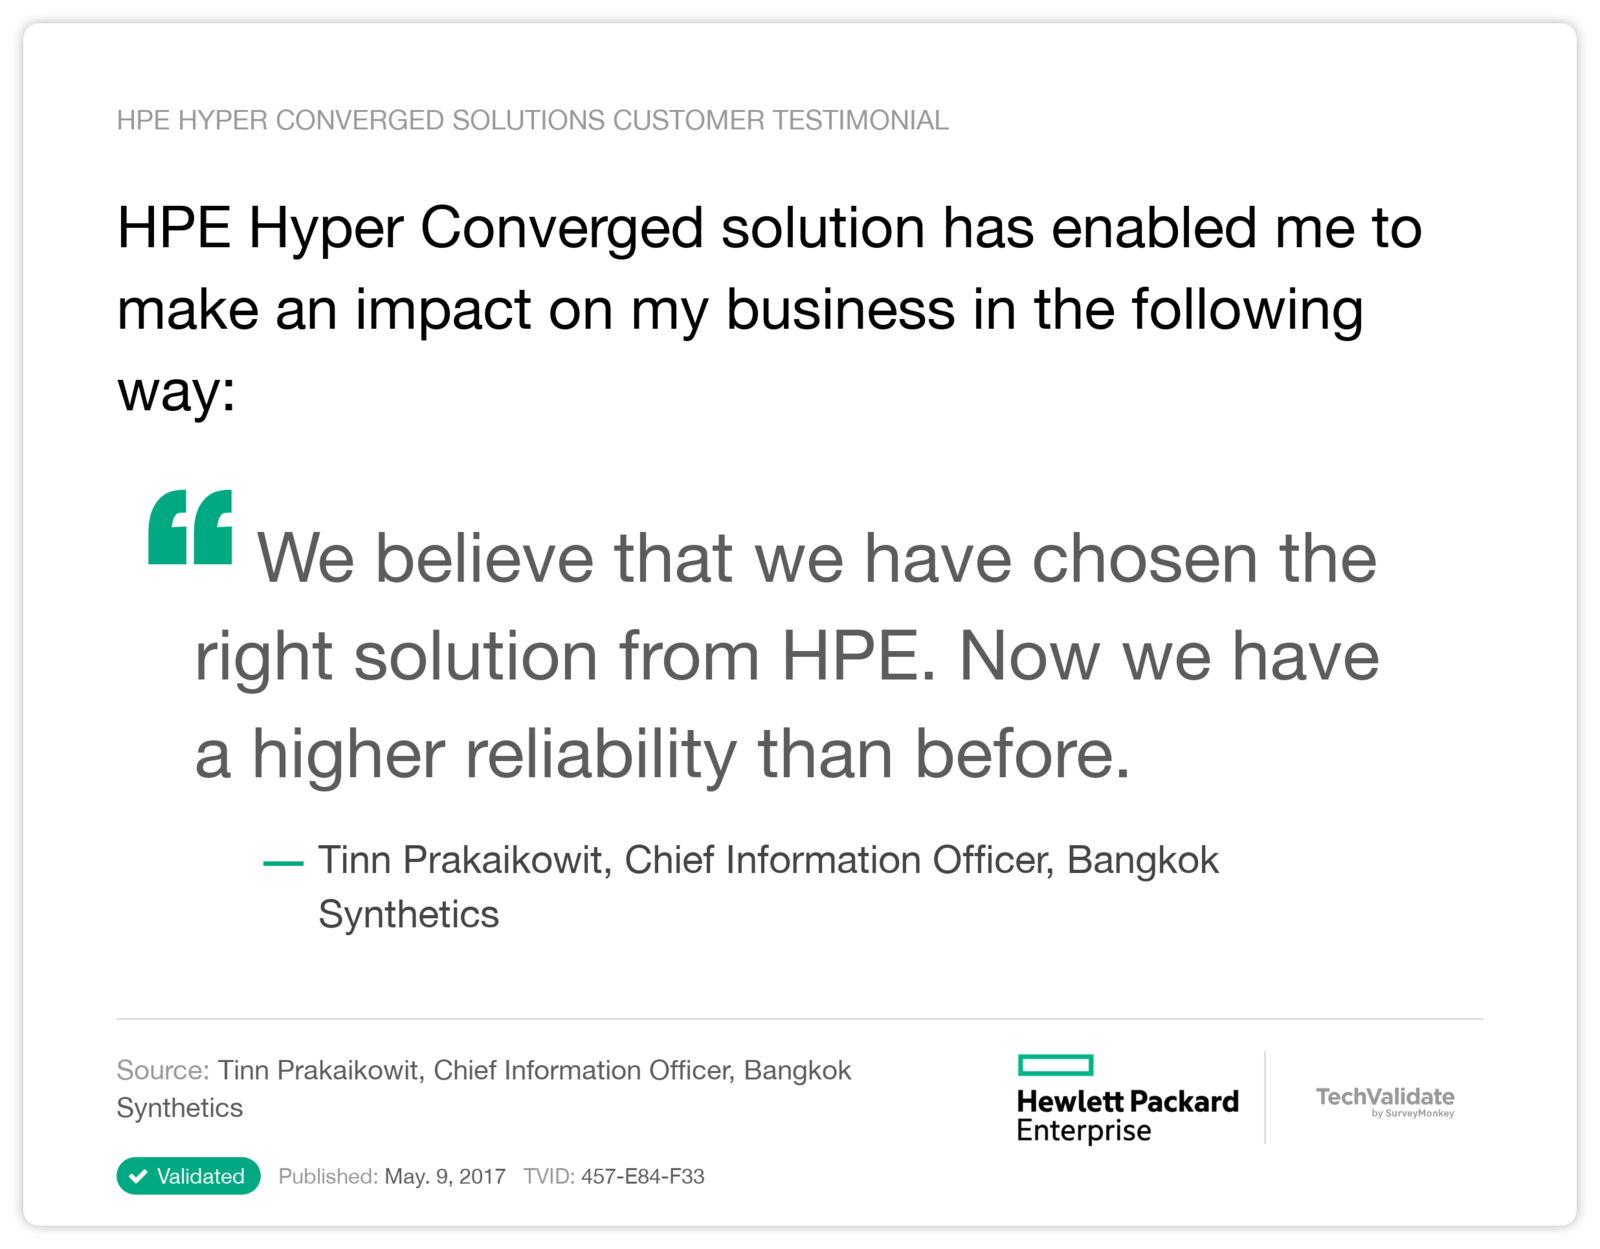 HPE Hyper Converged solution has enabled me to make an impact on my business in the following way: